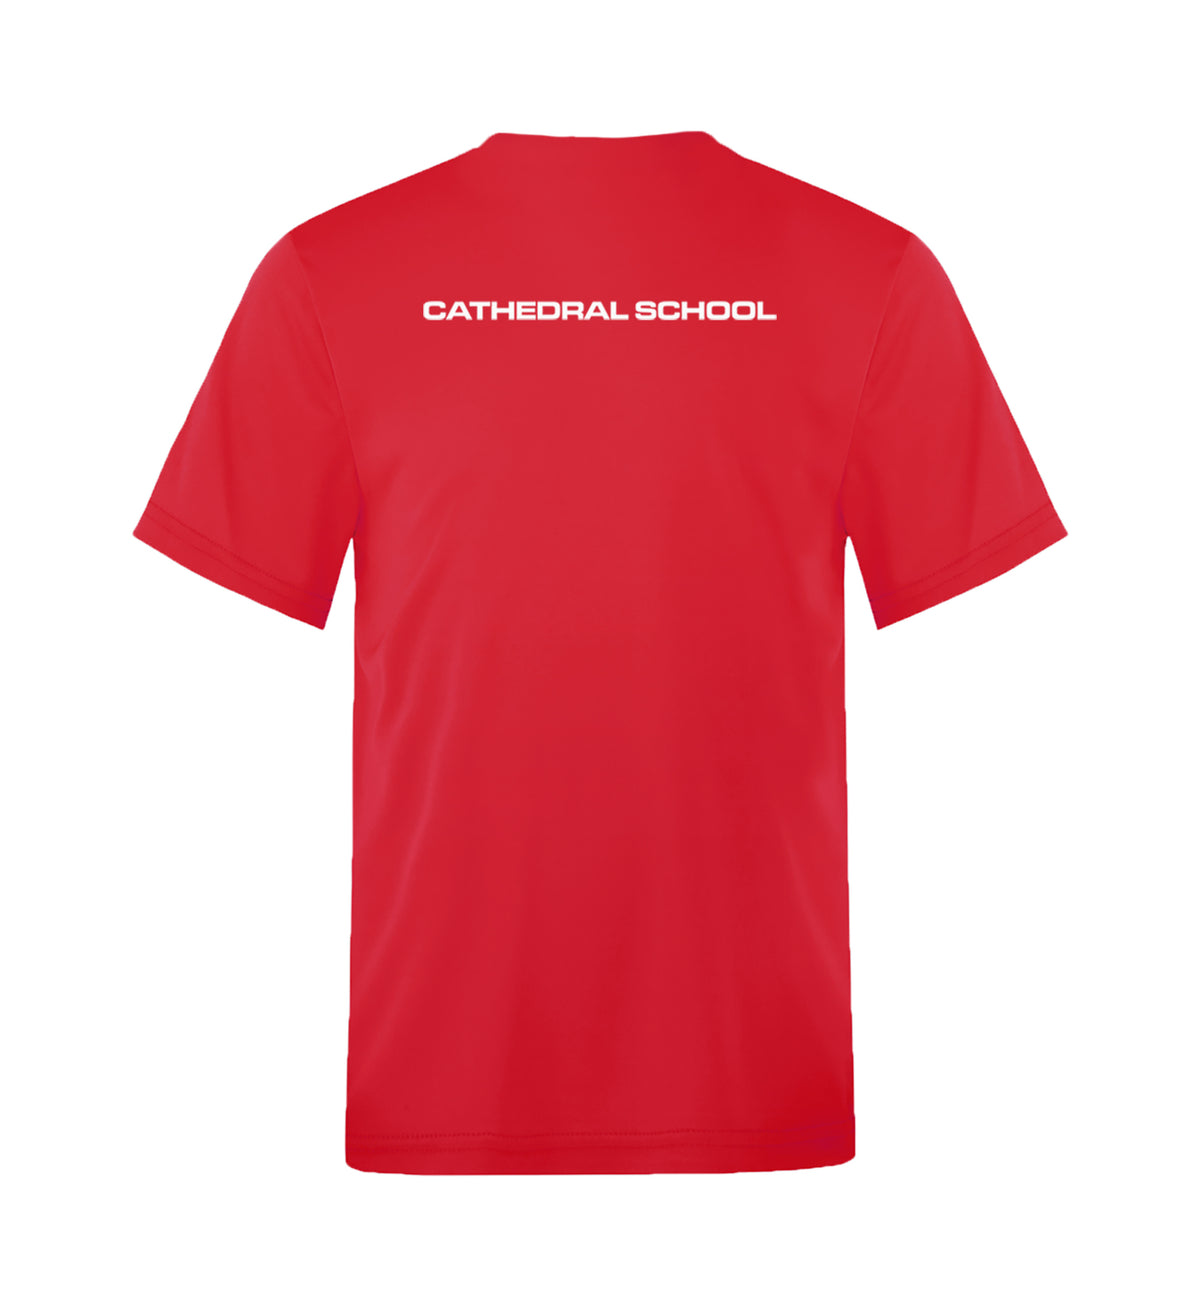 CATHEDRAL GYM T-SHIRT, WICKING, YOUTH